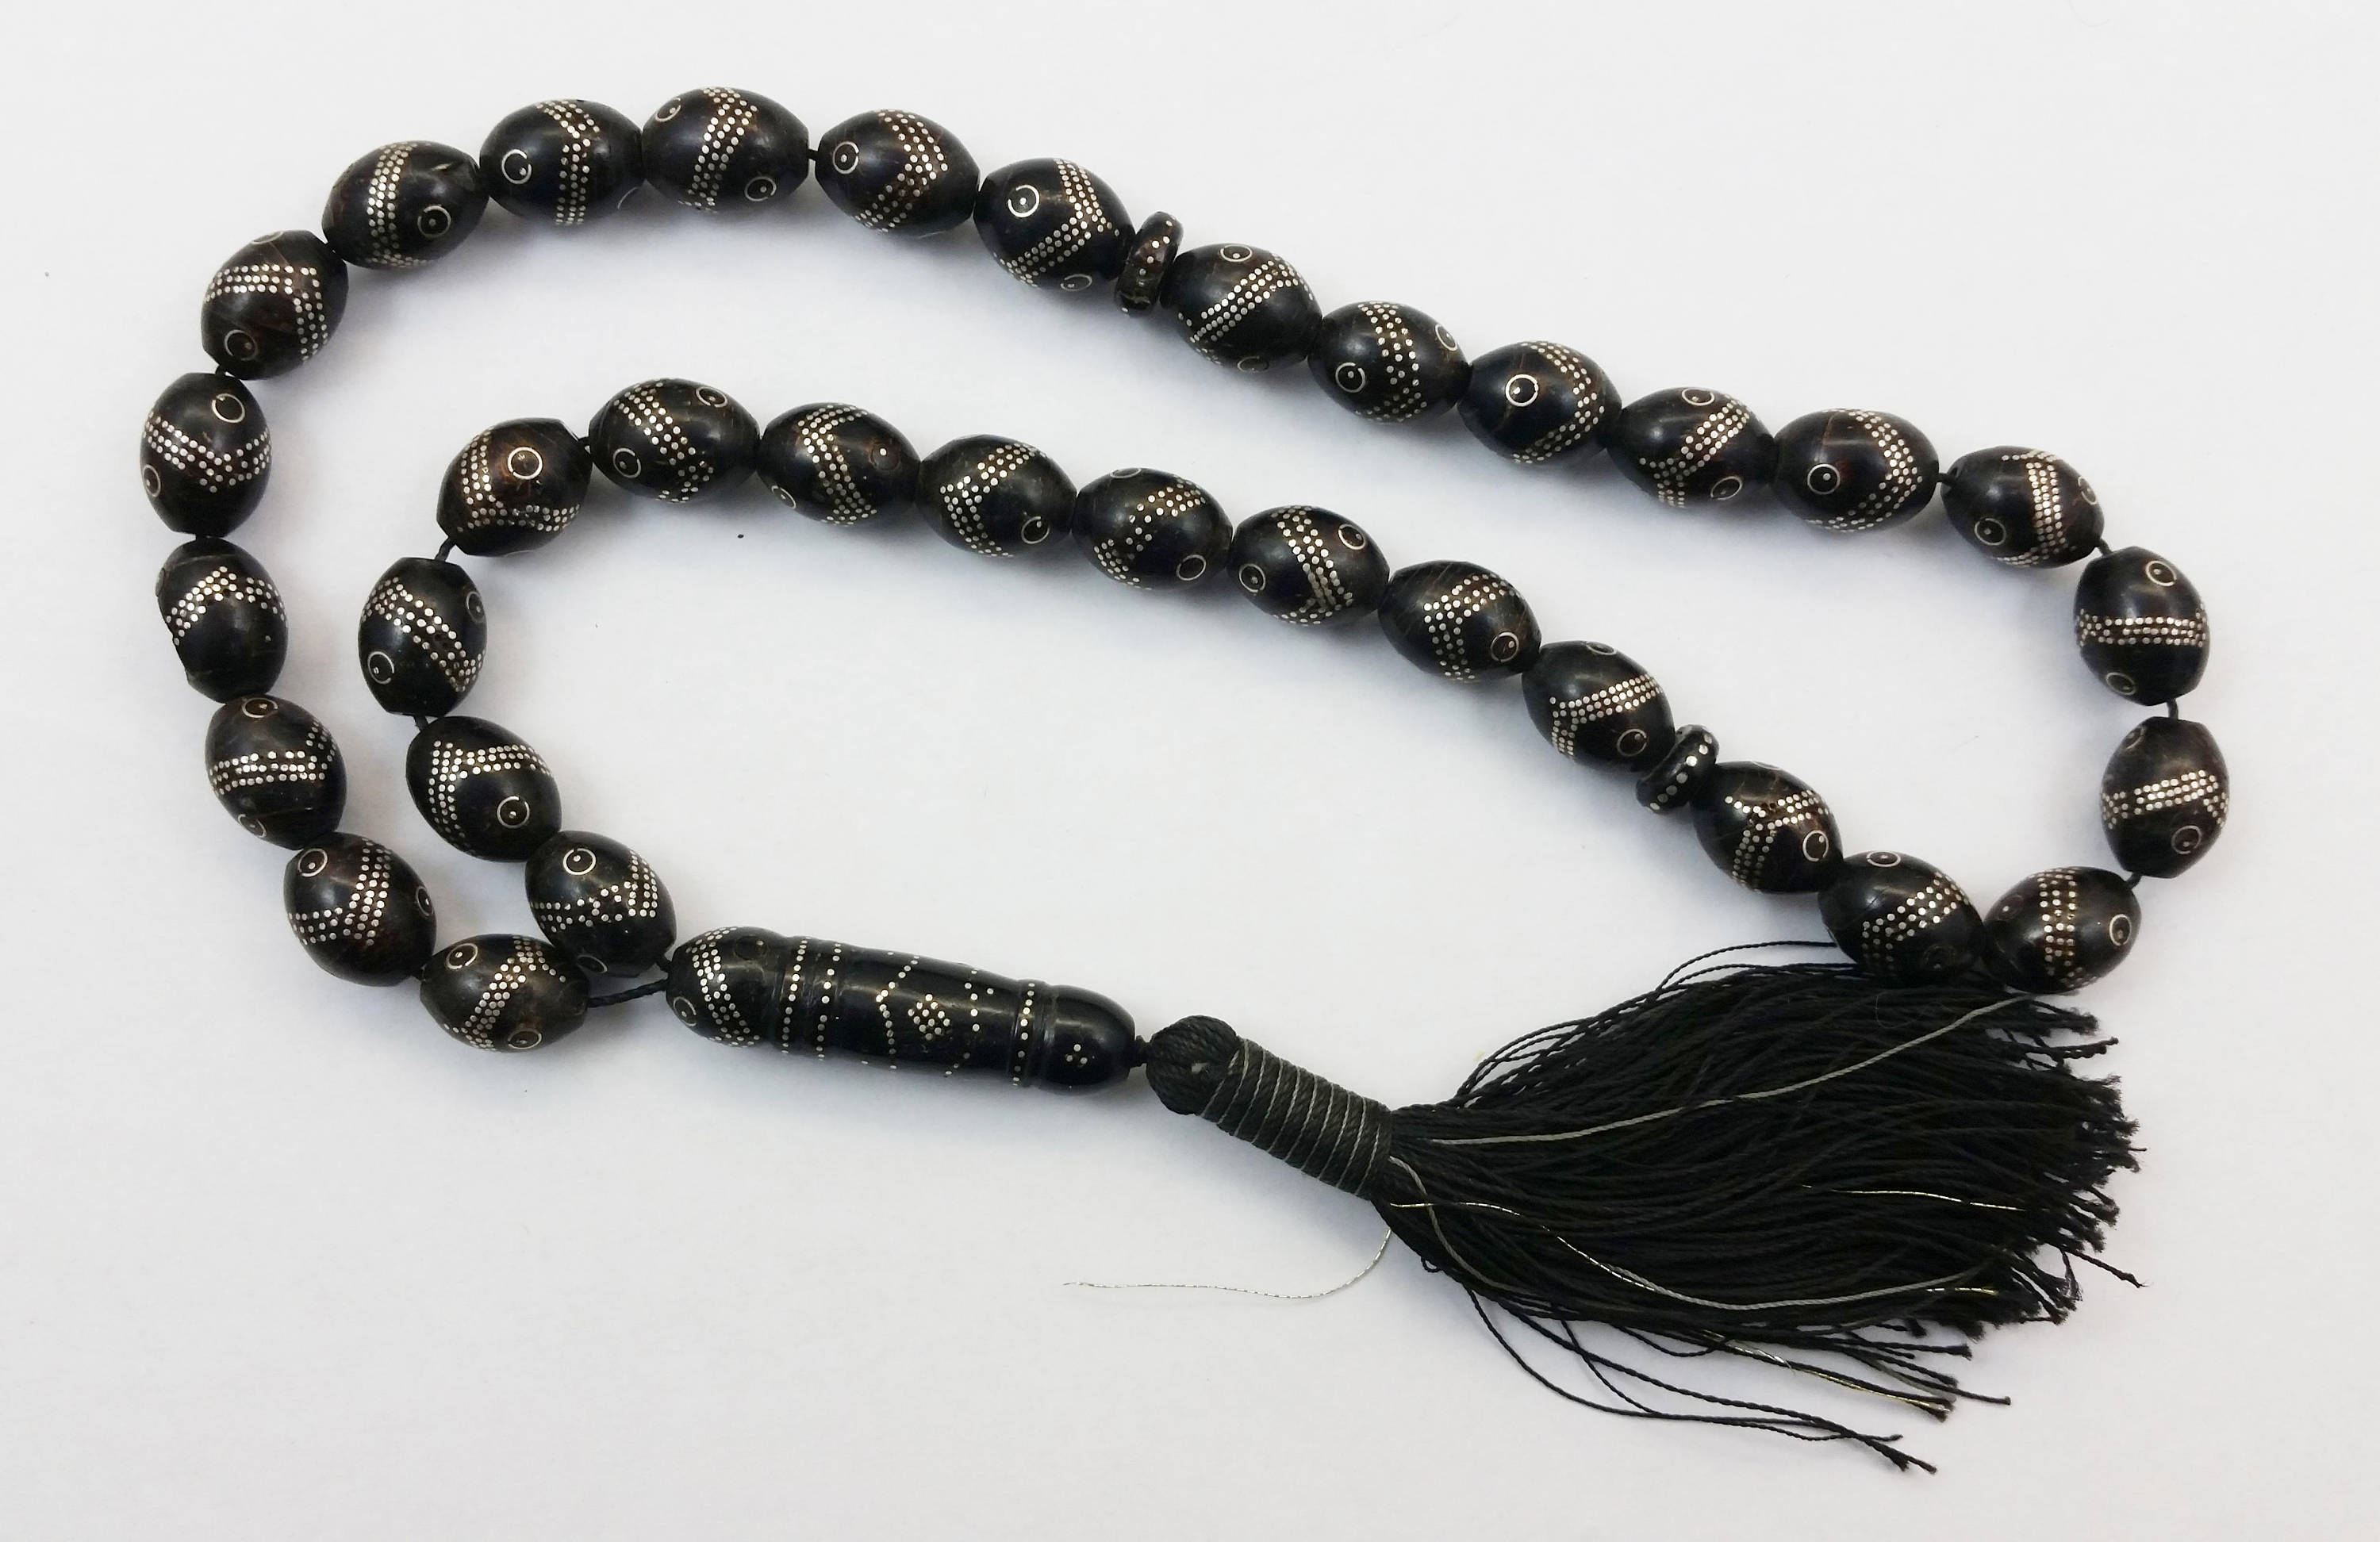 Authentic Antique Black Coral Islamic Prayer Beads Necklace | Etsy